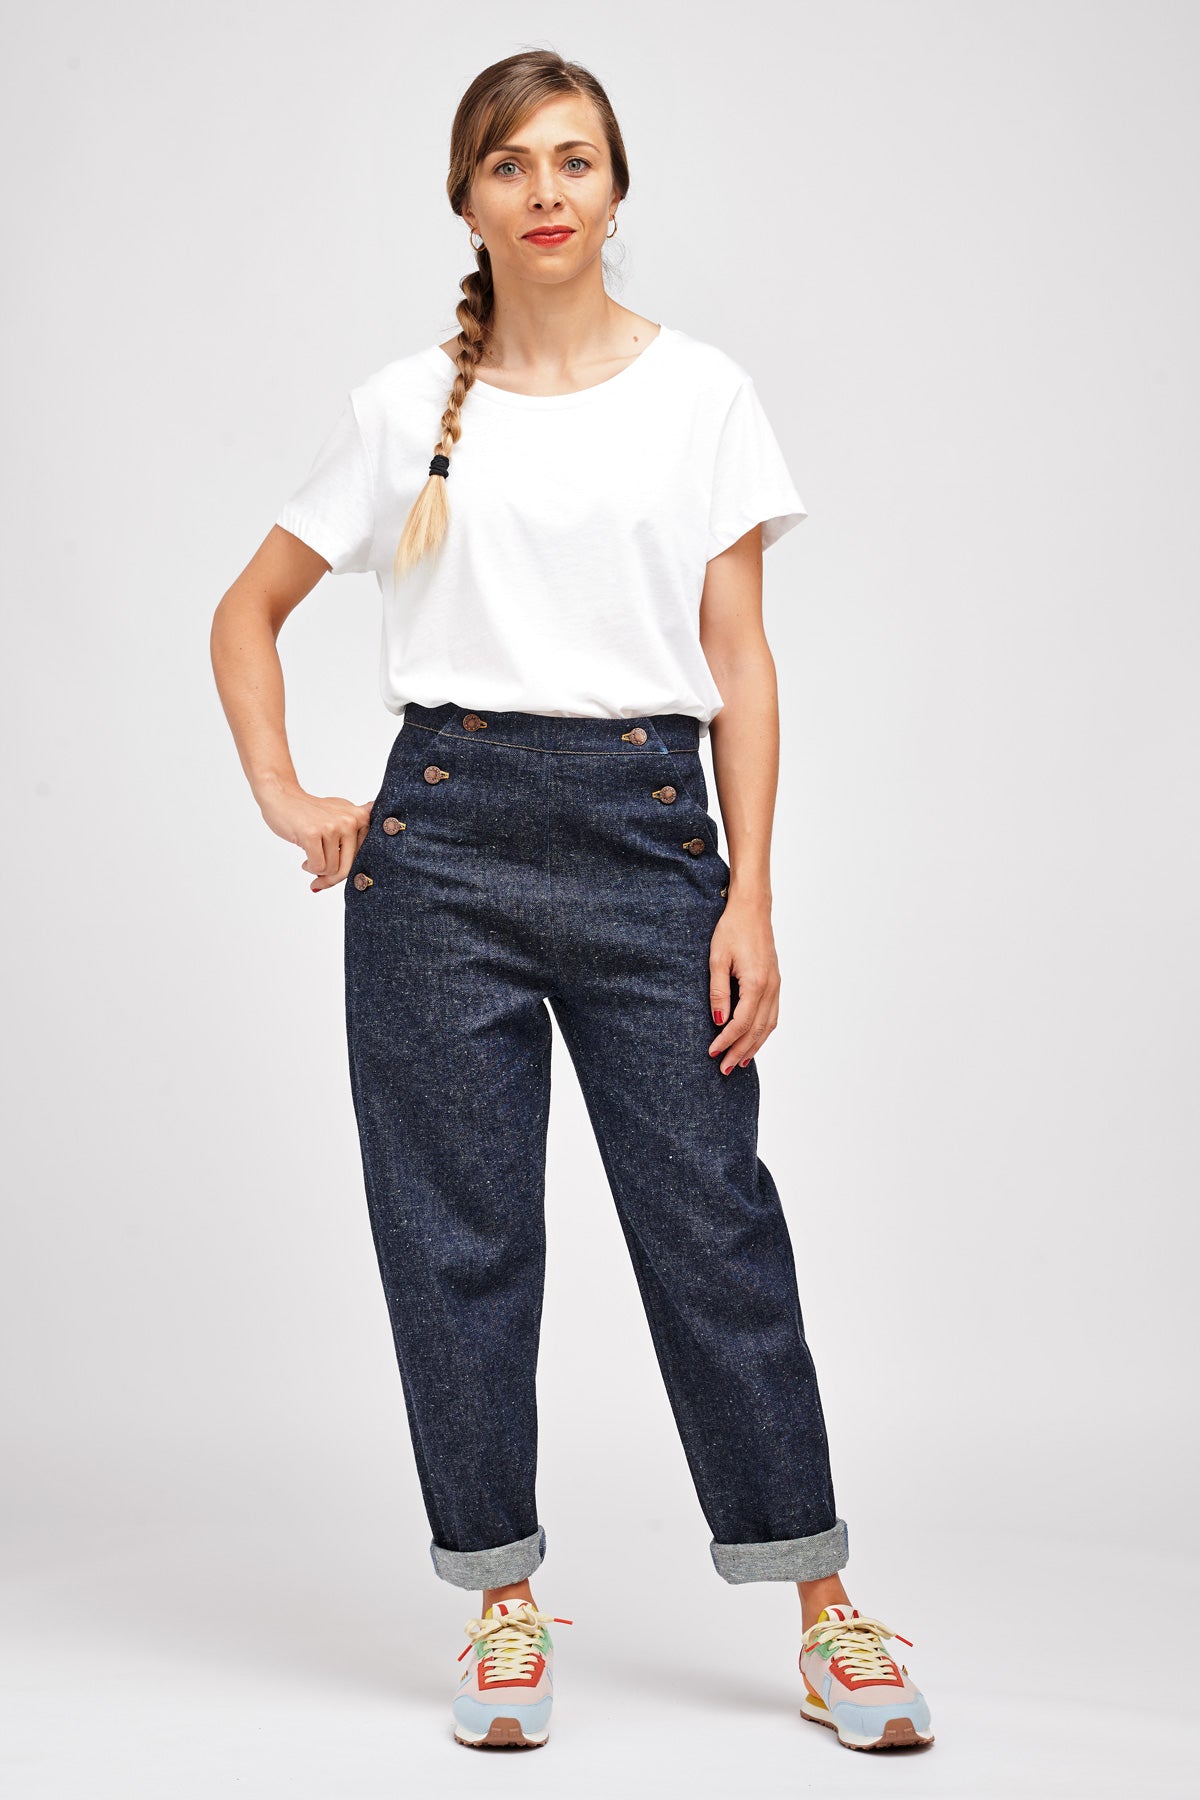 Woman wearing the Nout Trousers sewing pattern from I AM Patterns on The Fold Line. A sailor trouser pattern made in denim, cotton twill, chambray, linen, jacquard, corduroy or gabardine fabrics, featuring an ankle length, tapered leg, buttoned front flap